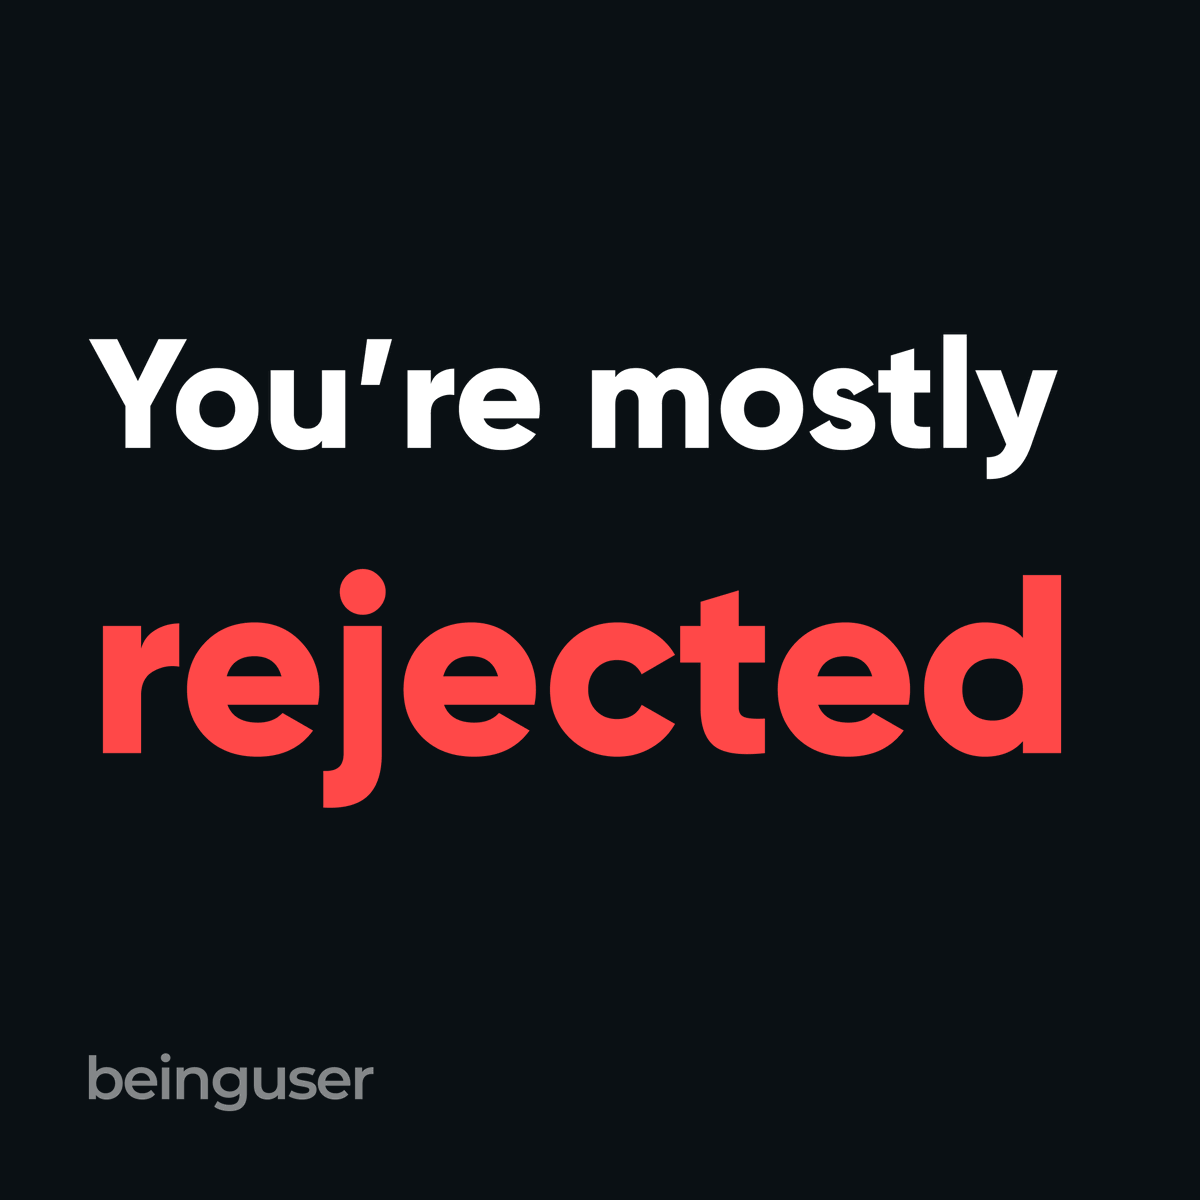 Designers, you’re mostly rejected if: ❌
---
→  Your portfolio consists only of academic projects or projects not aligned with the role you're applying for.

#design #uxdesign #uidesign #uxui #designers #productdesigners #uxdesigners  #designcommunity #designjobs #beinguser